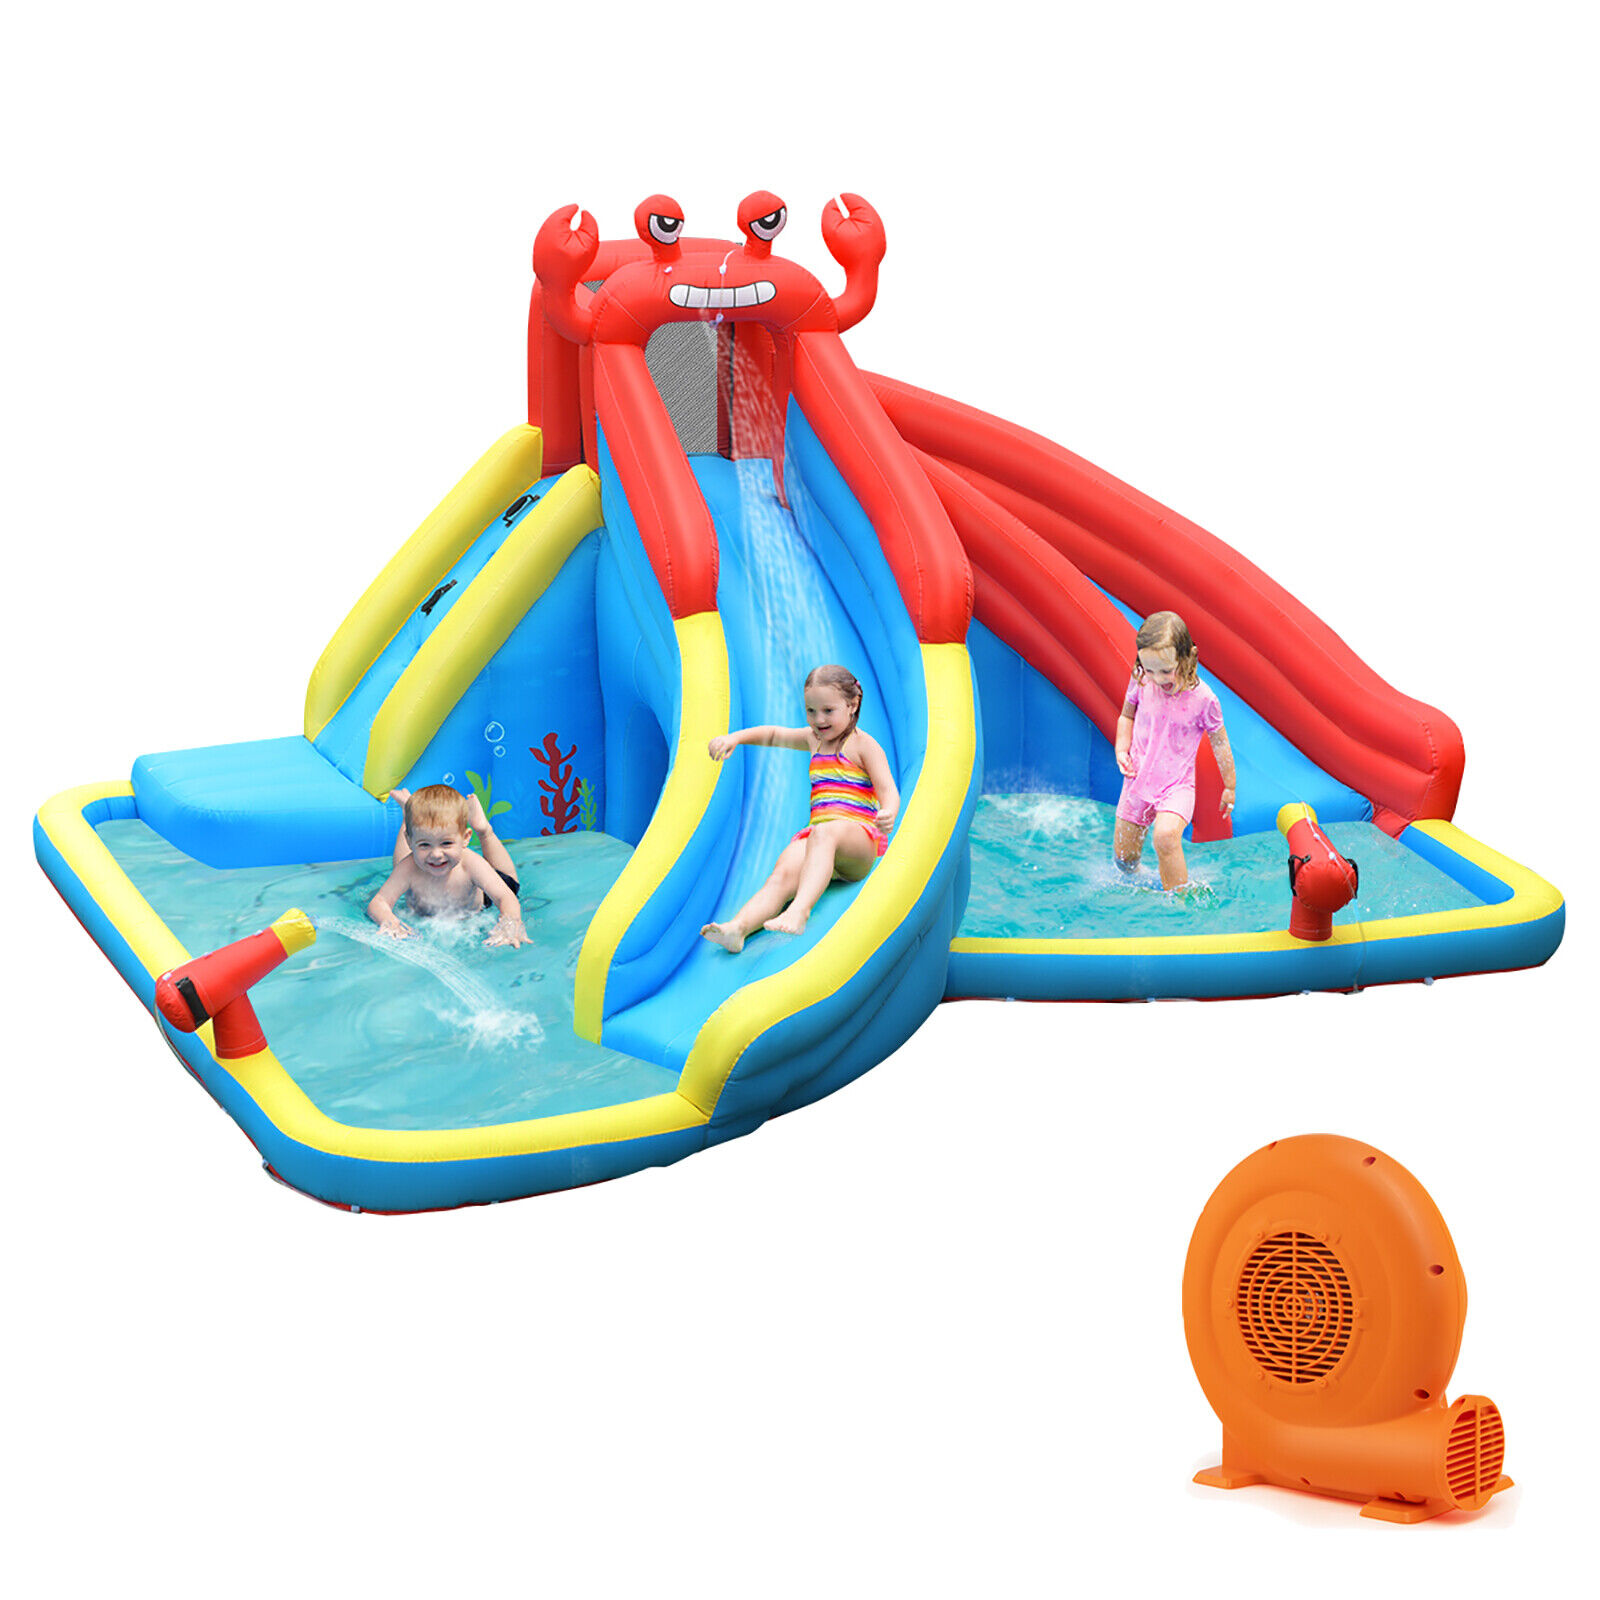 Great Choice Products Inflatable Water Slide Crab Dual Slide Bounce House Splash Pool With 750W Blower